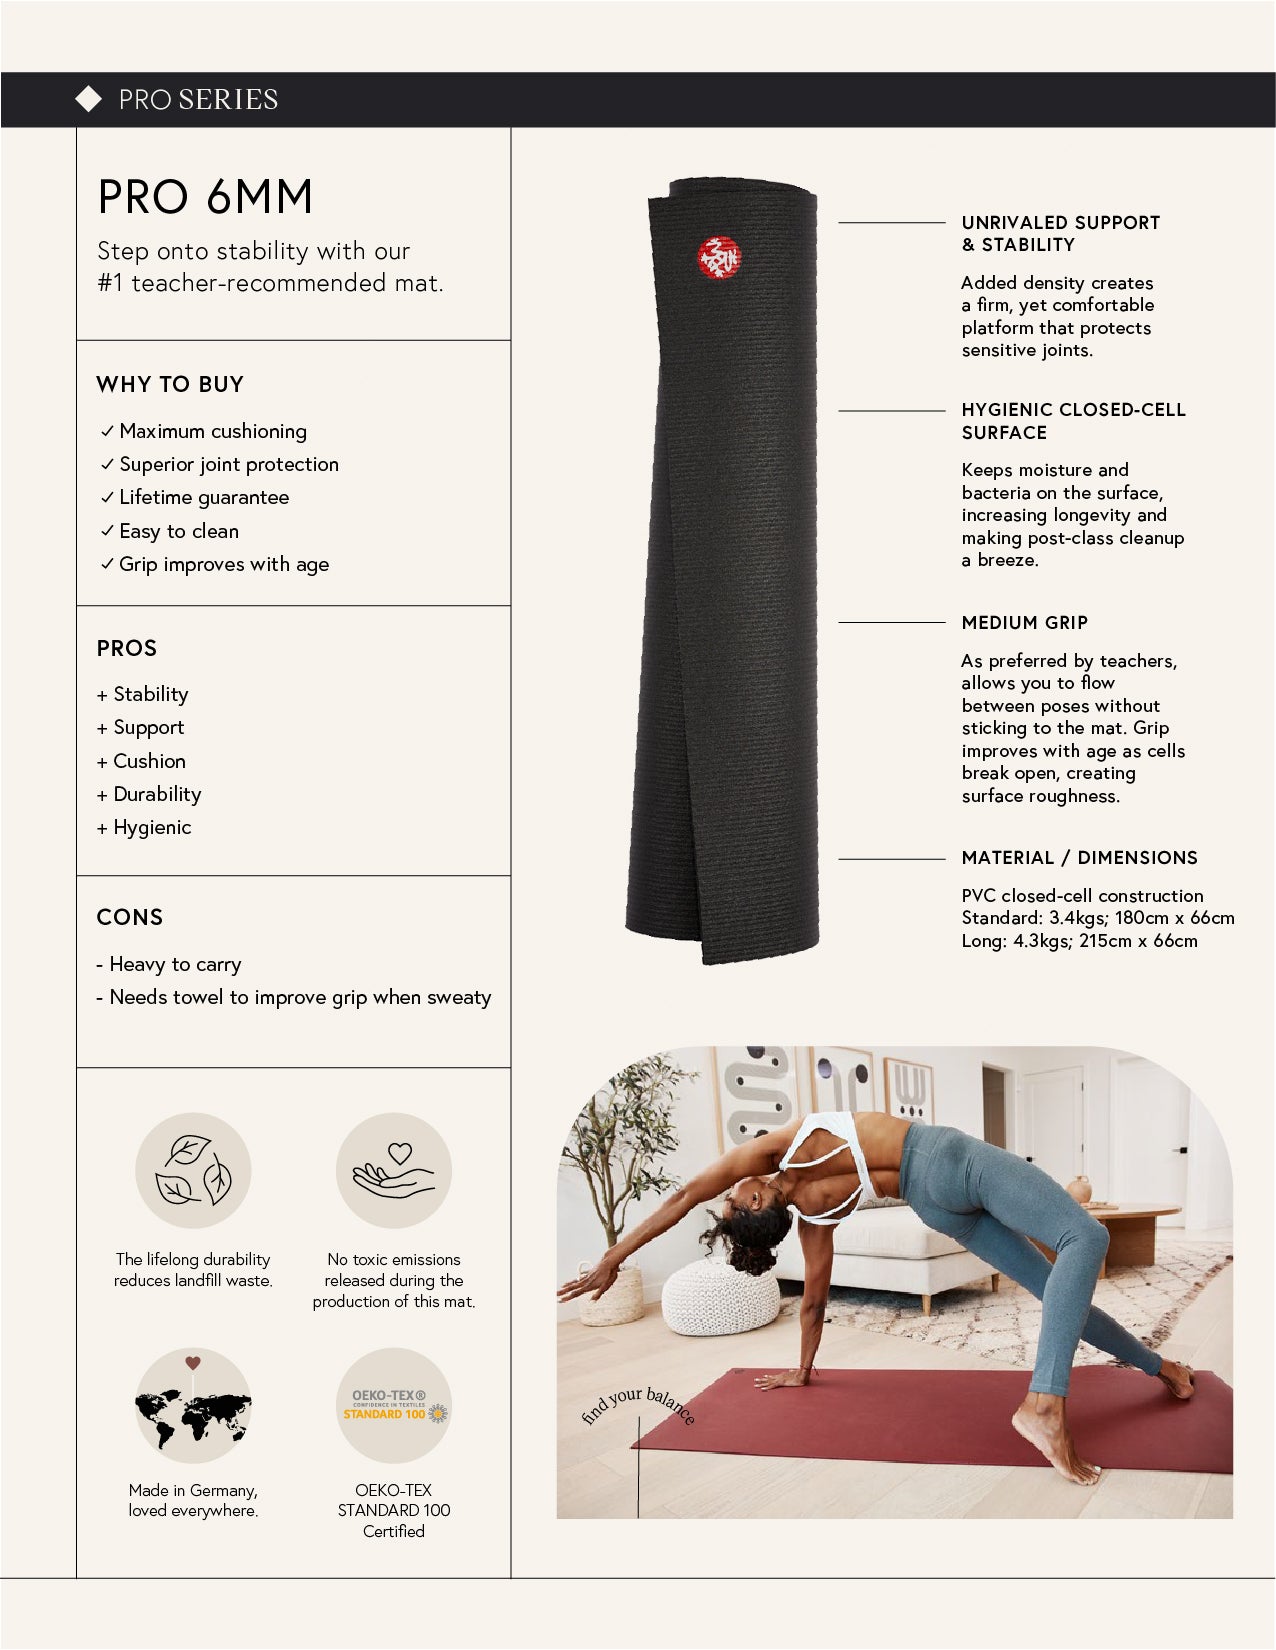 Manduka EKO Superlite Yoga Travel Mat – 1.5mm Thick Travel Mat for  Portability, Eco Friendly and Made from Natural Tree Rubber. Superior Catch  Grip